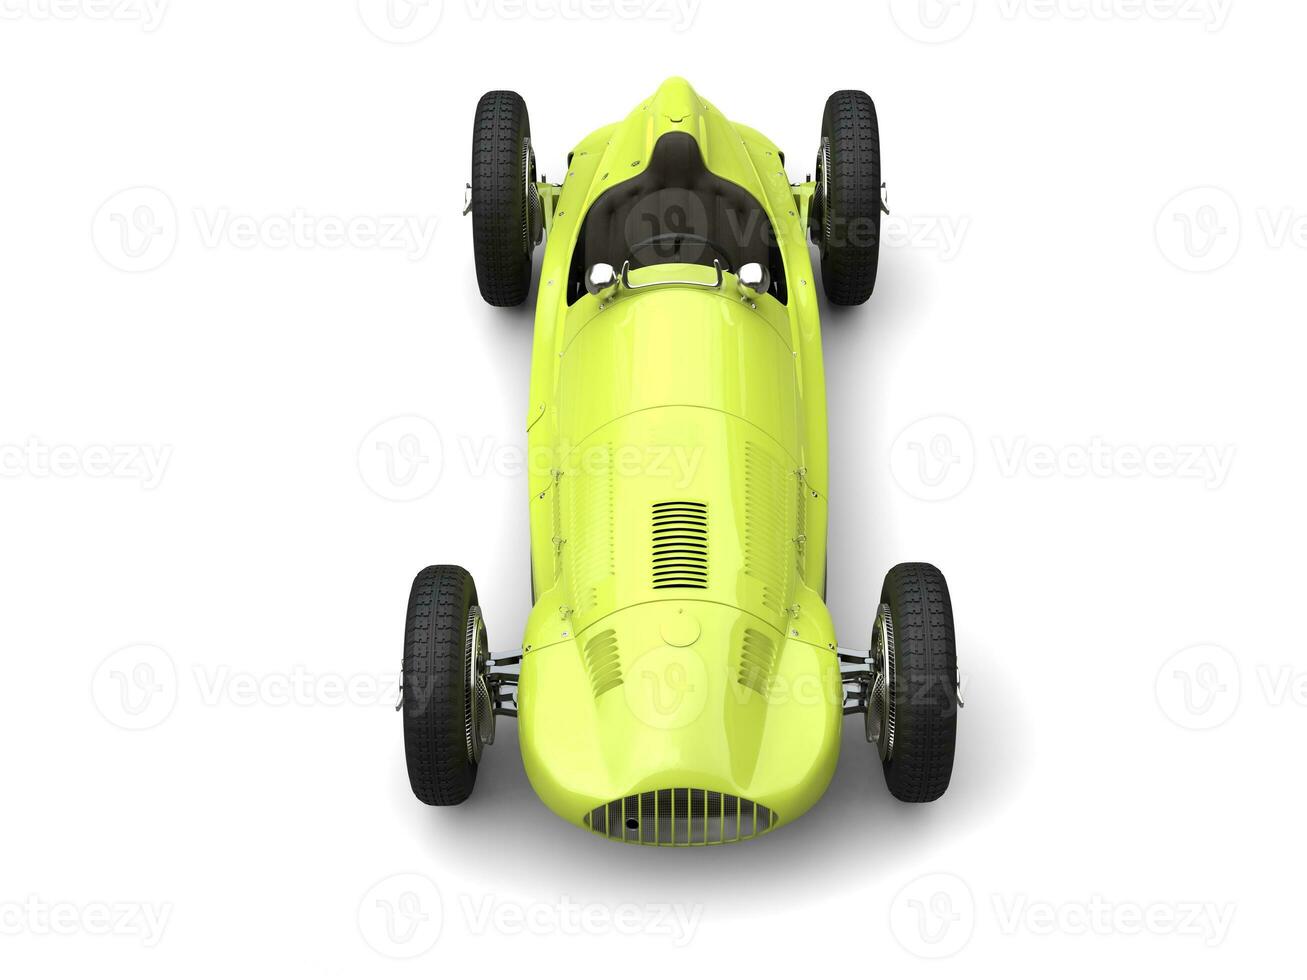 Tropical bright green vintage race sports car - top down view photo